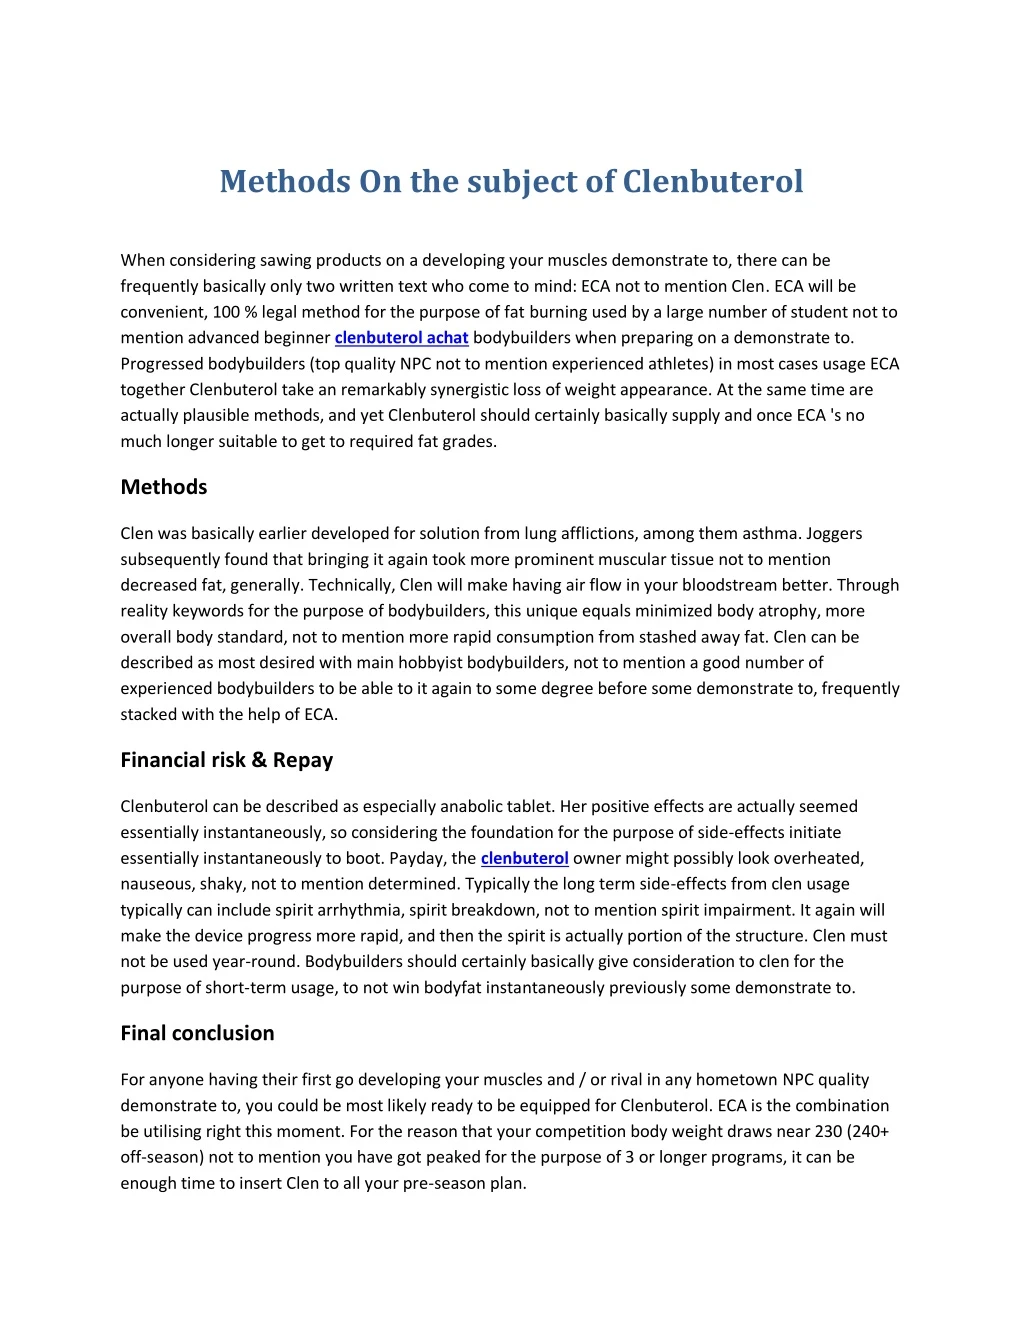 methods on the subject of clenbuterol